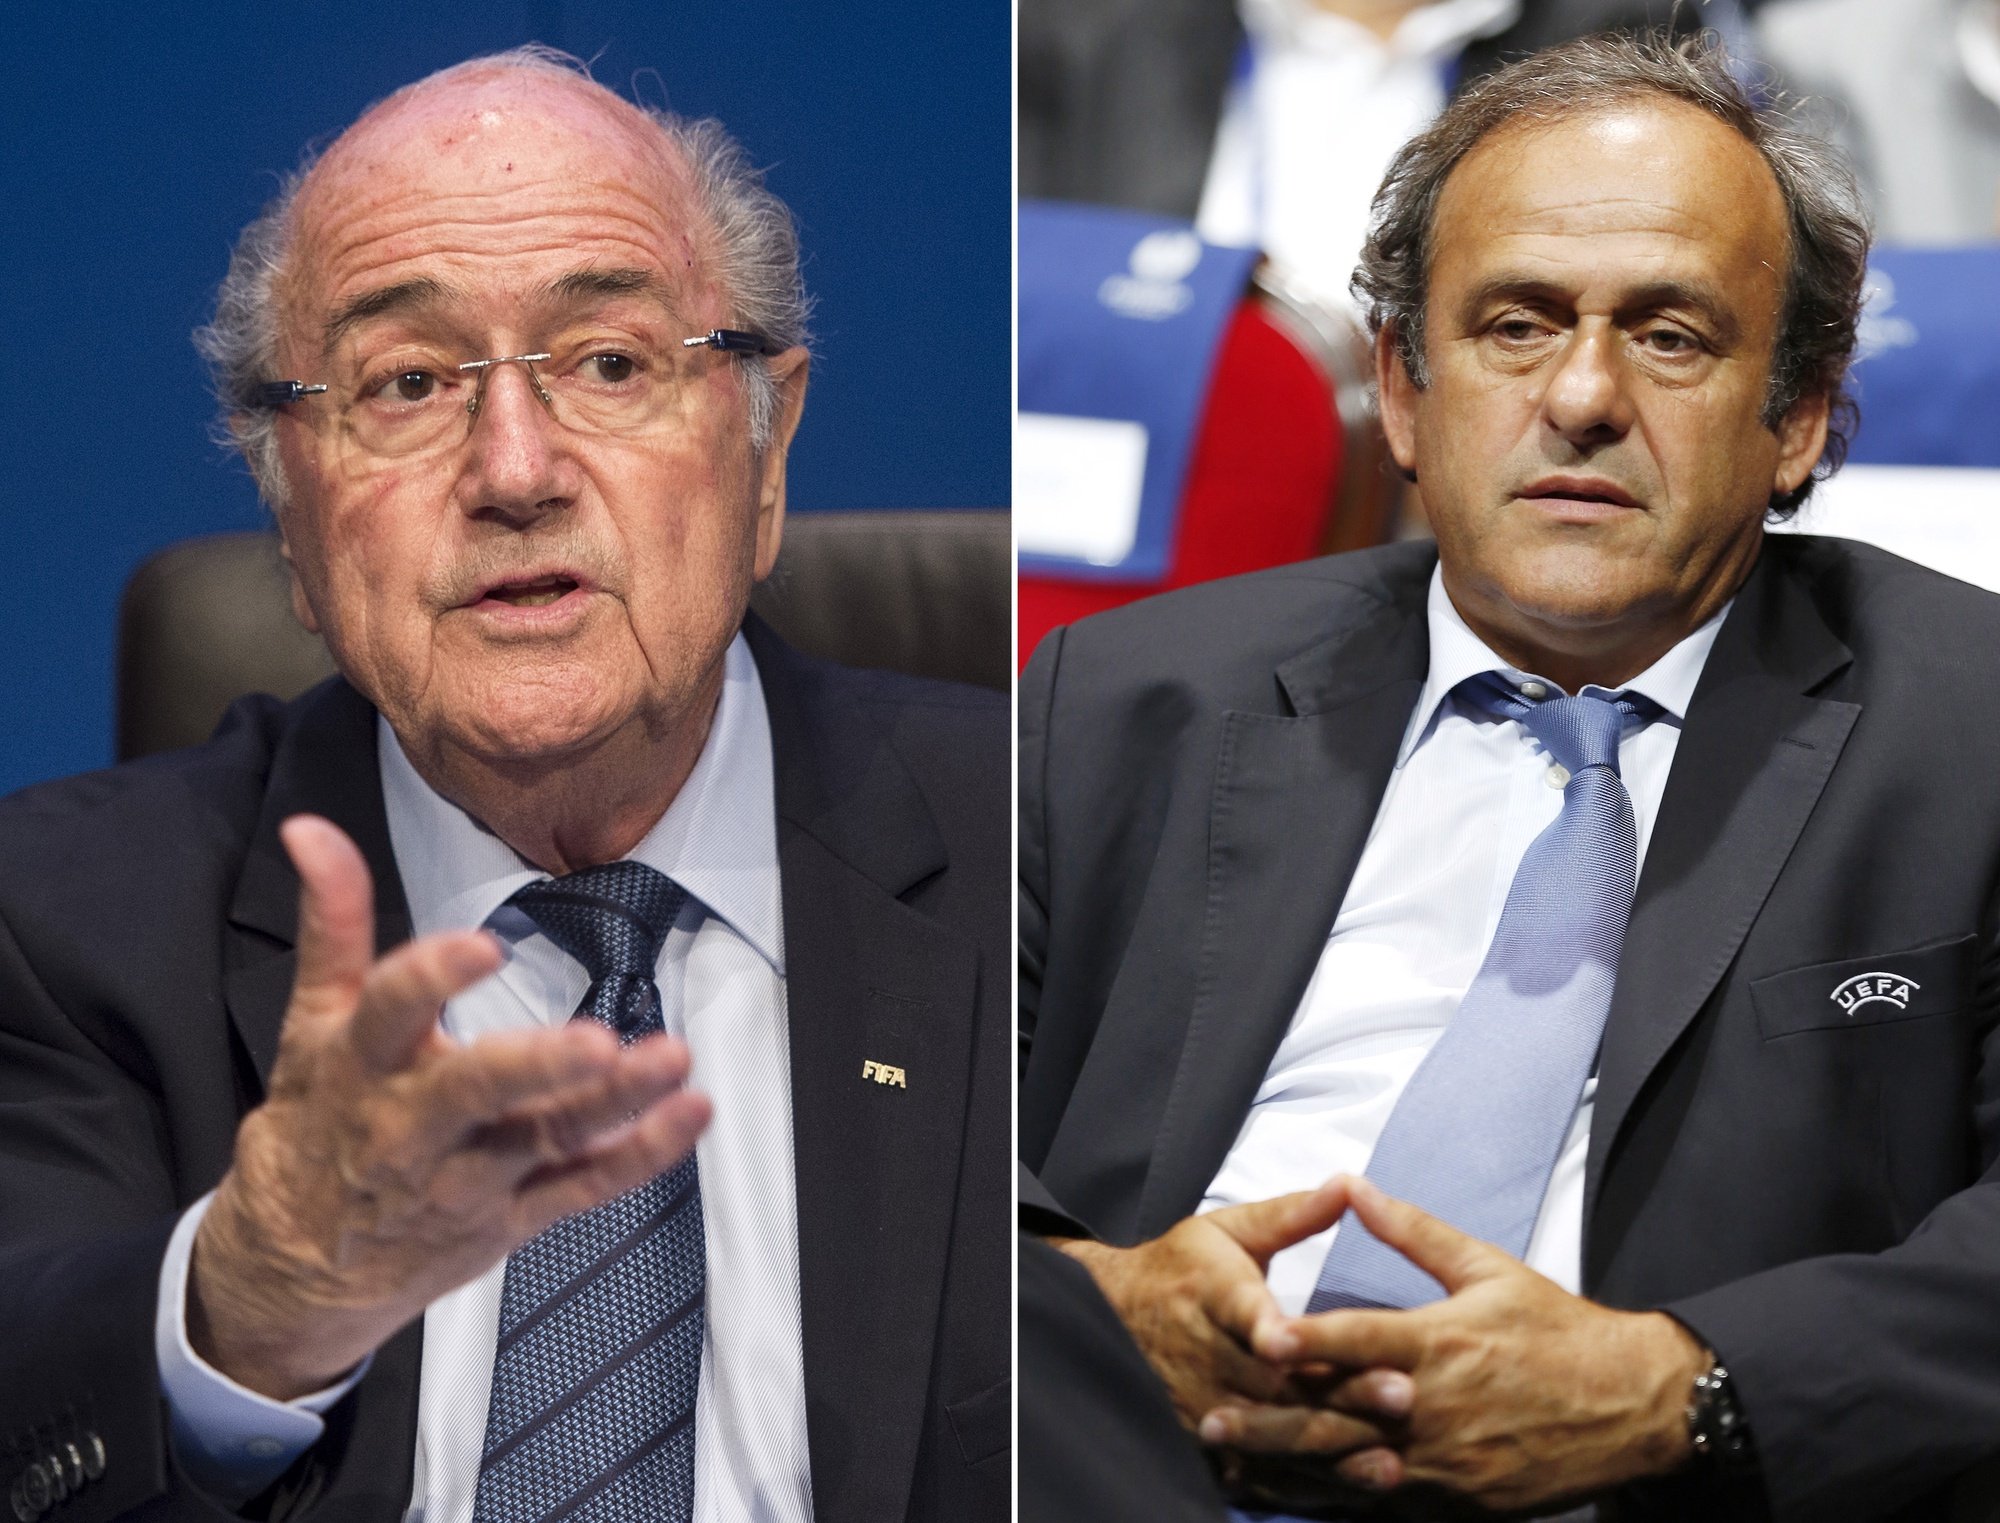 epa09559441 (FILE) - A composite file picture of FIFA president Joseph &#039;Sepp&#039; Blatter (taken on 30 May 2015 in Zurich, Switzerland) and UEFA president Michel Platini (taken on 29 August 2014 in Monaco, re-issued on 02 November 2021). Former FIFA officials Sepp Blatter and Michel Platini have been charged with fraud in Switzerland over a controversial 1.58 million euro payment, Swiss federal prosecutors confirmed on 02 November 2021.  EPA/ENNIO LEANZA - SEBASTIEN NOGIER *** Local Caption *** 52480895